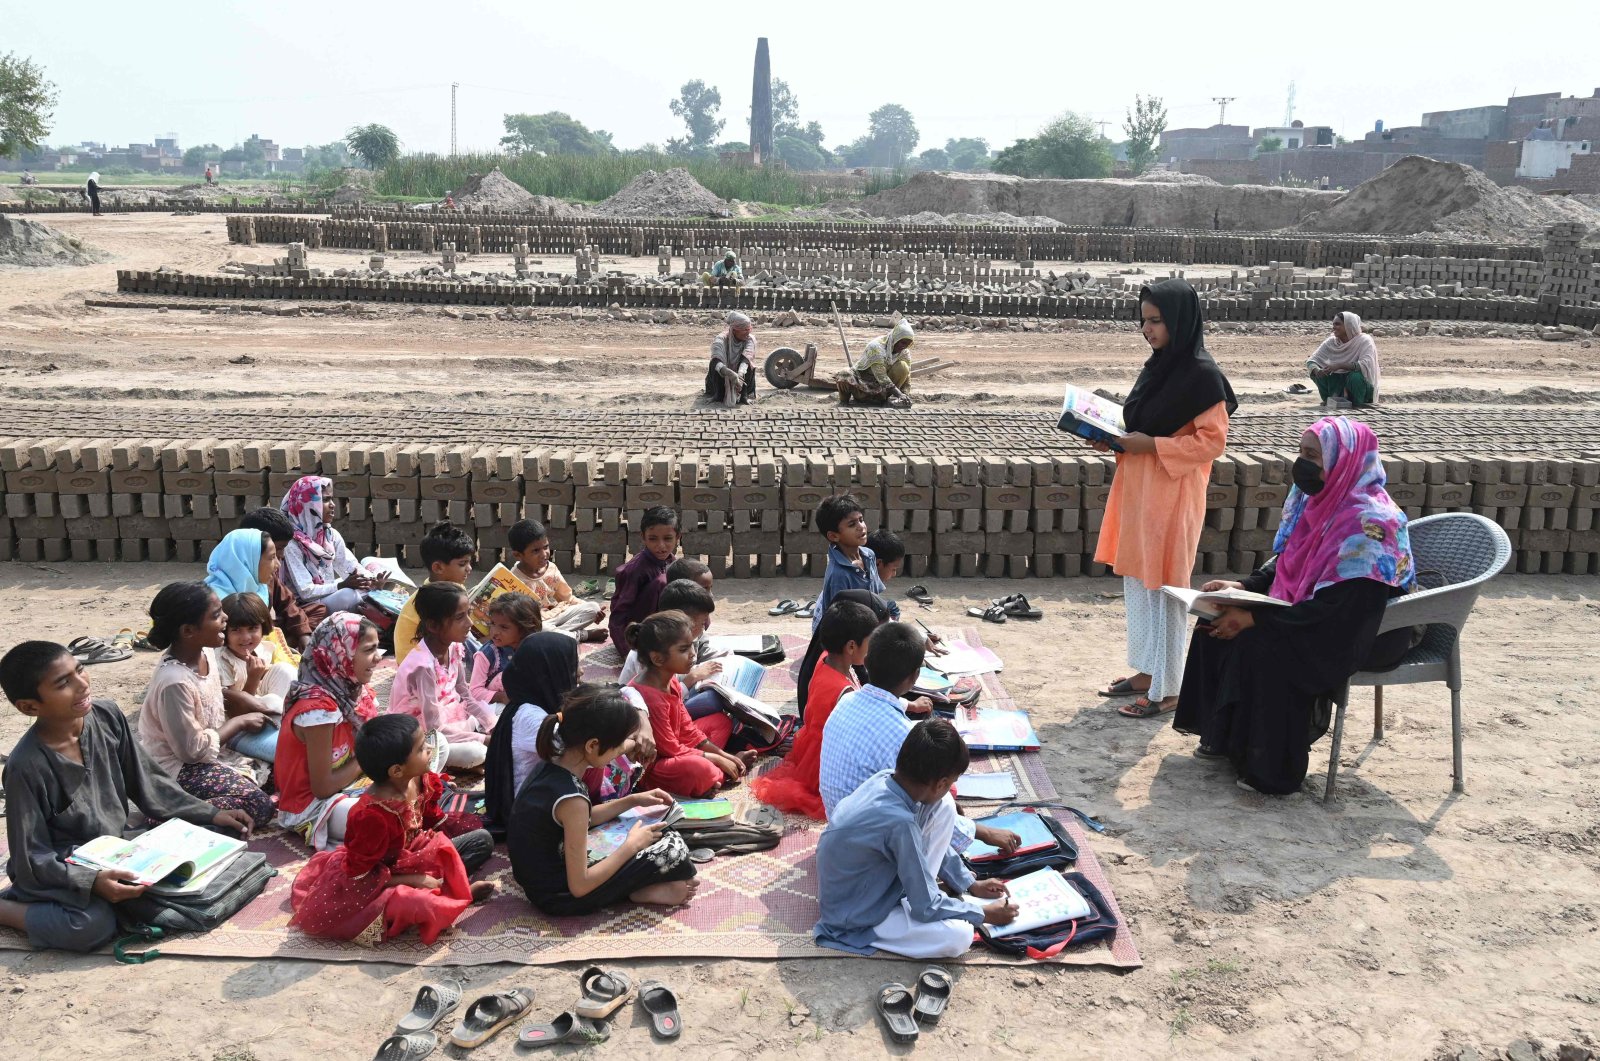 Children of brick kiln workers attend a class at a brick kiln site in Lahore, Pakistan, Sept. 8, 2022. (AFP Photo)